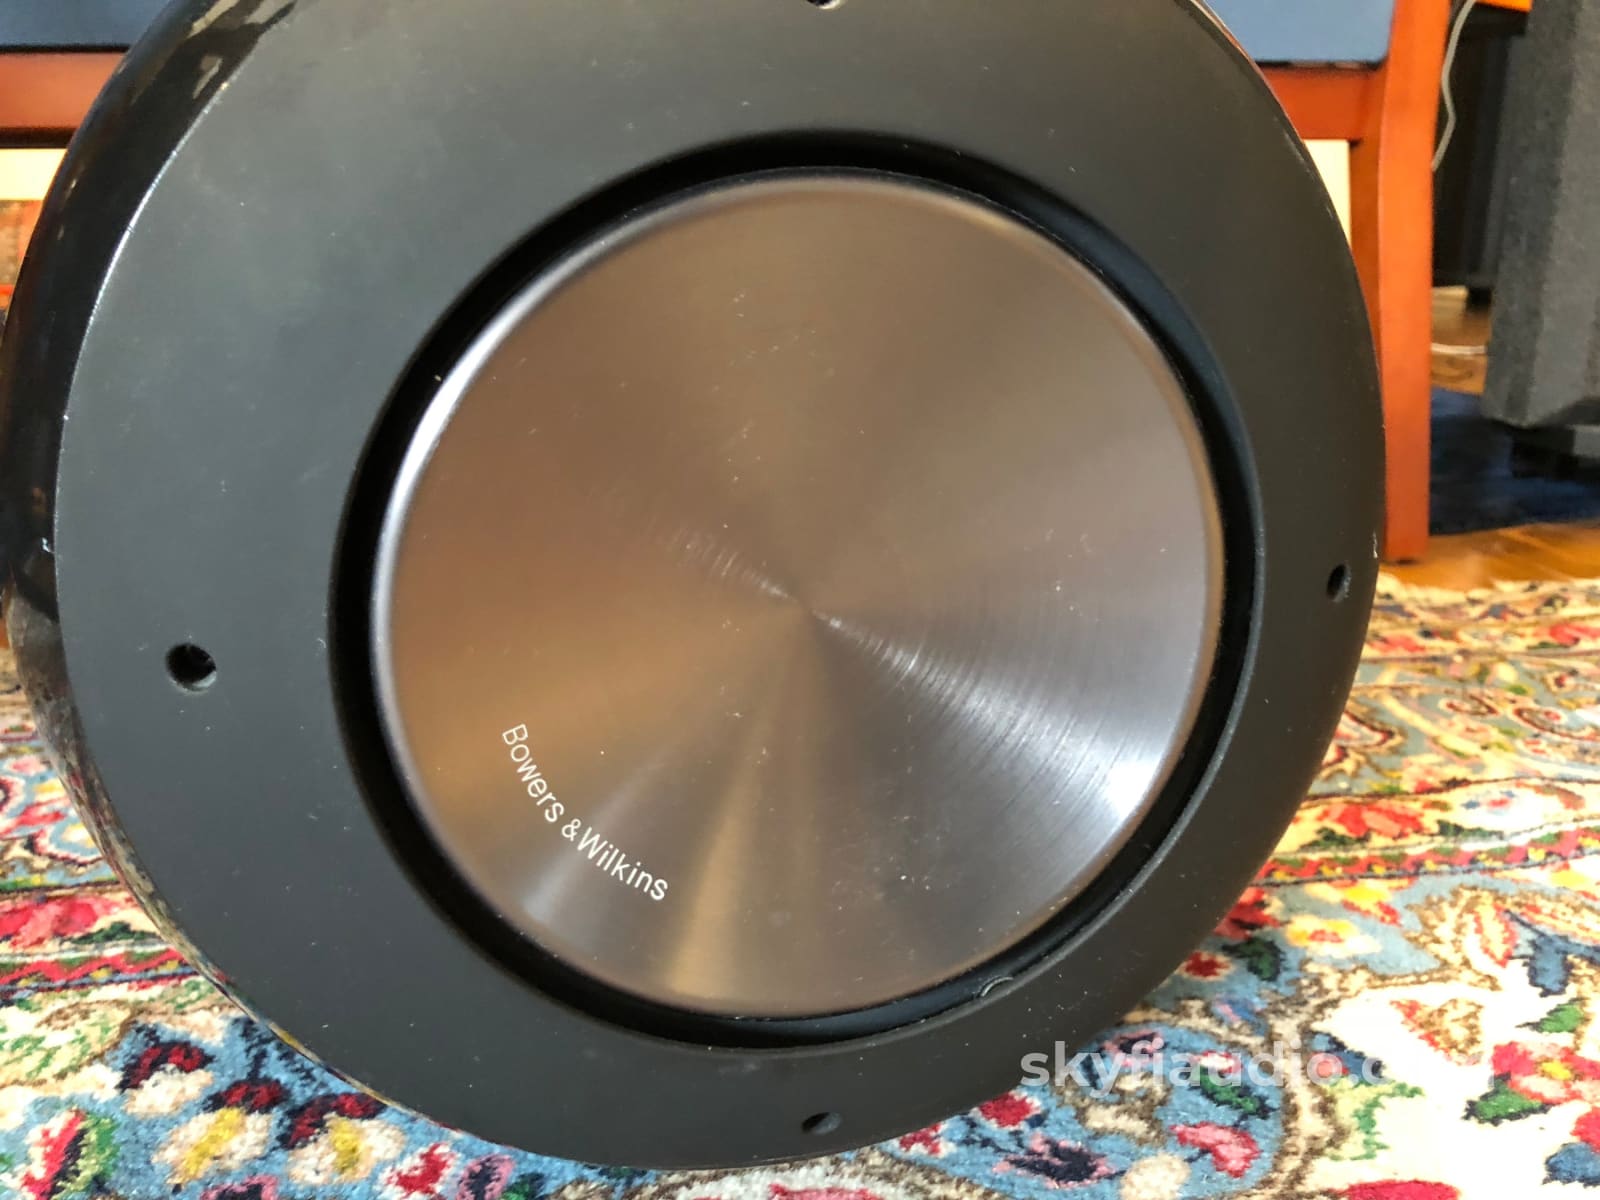 B&W (Bowers & Wilkins) Pv-1 Subwoofer Speakers